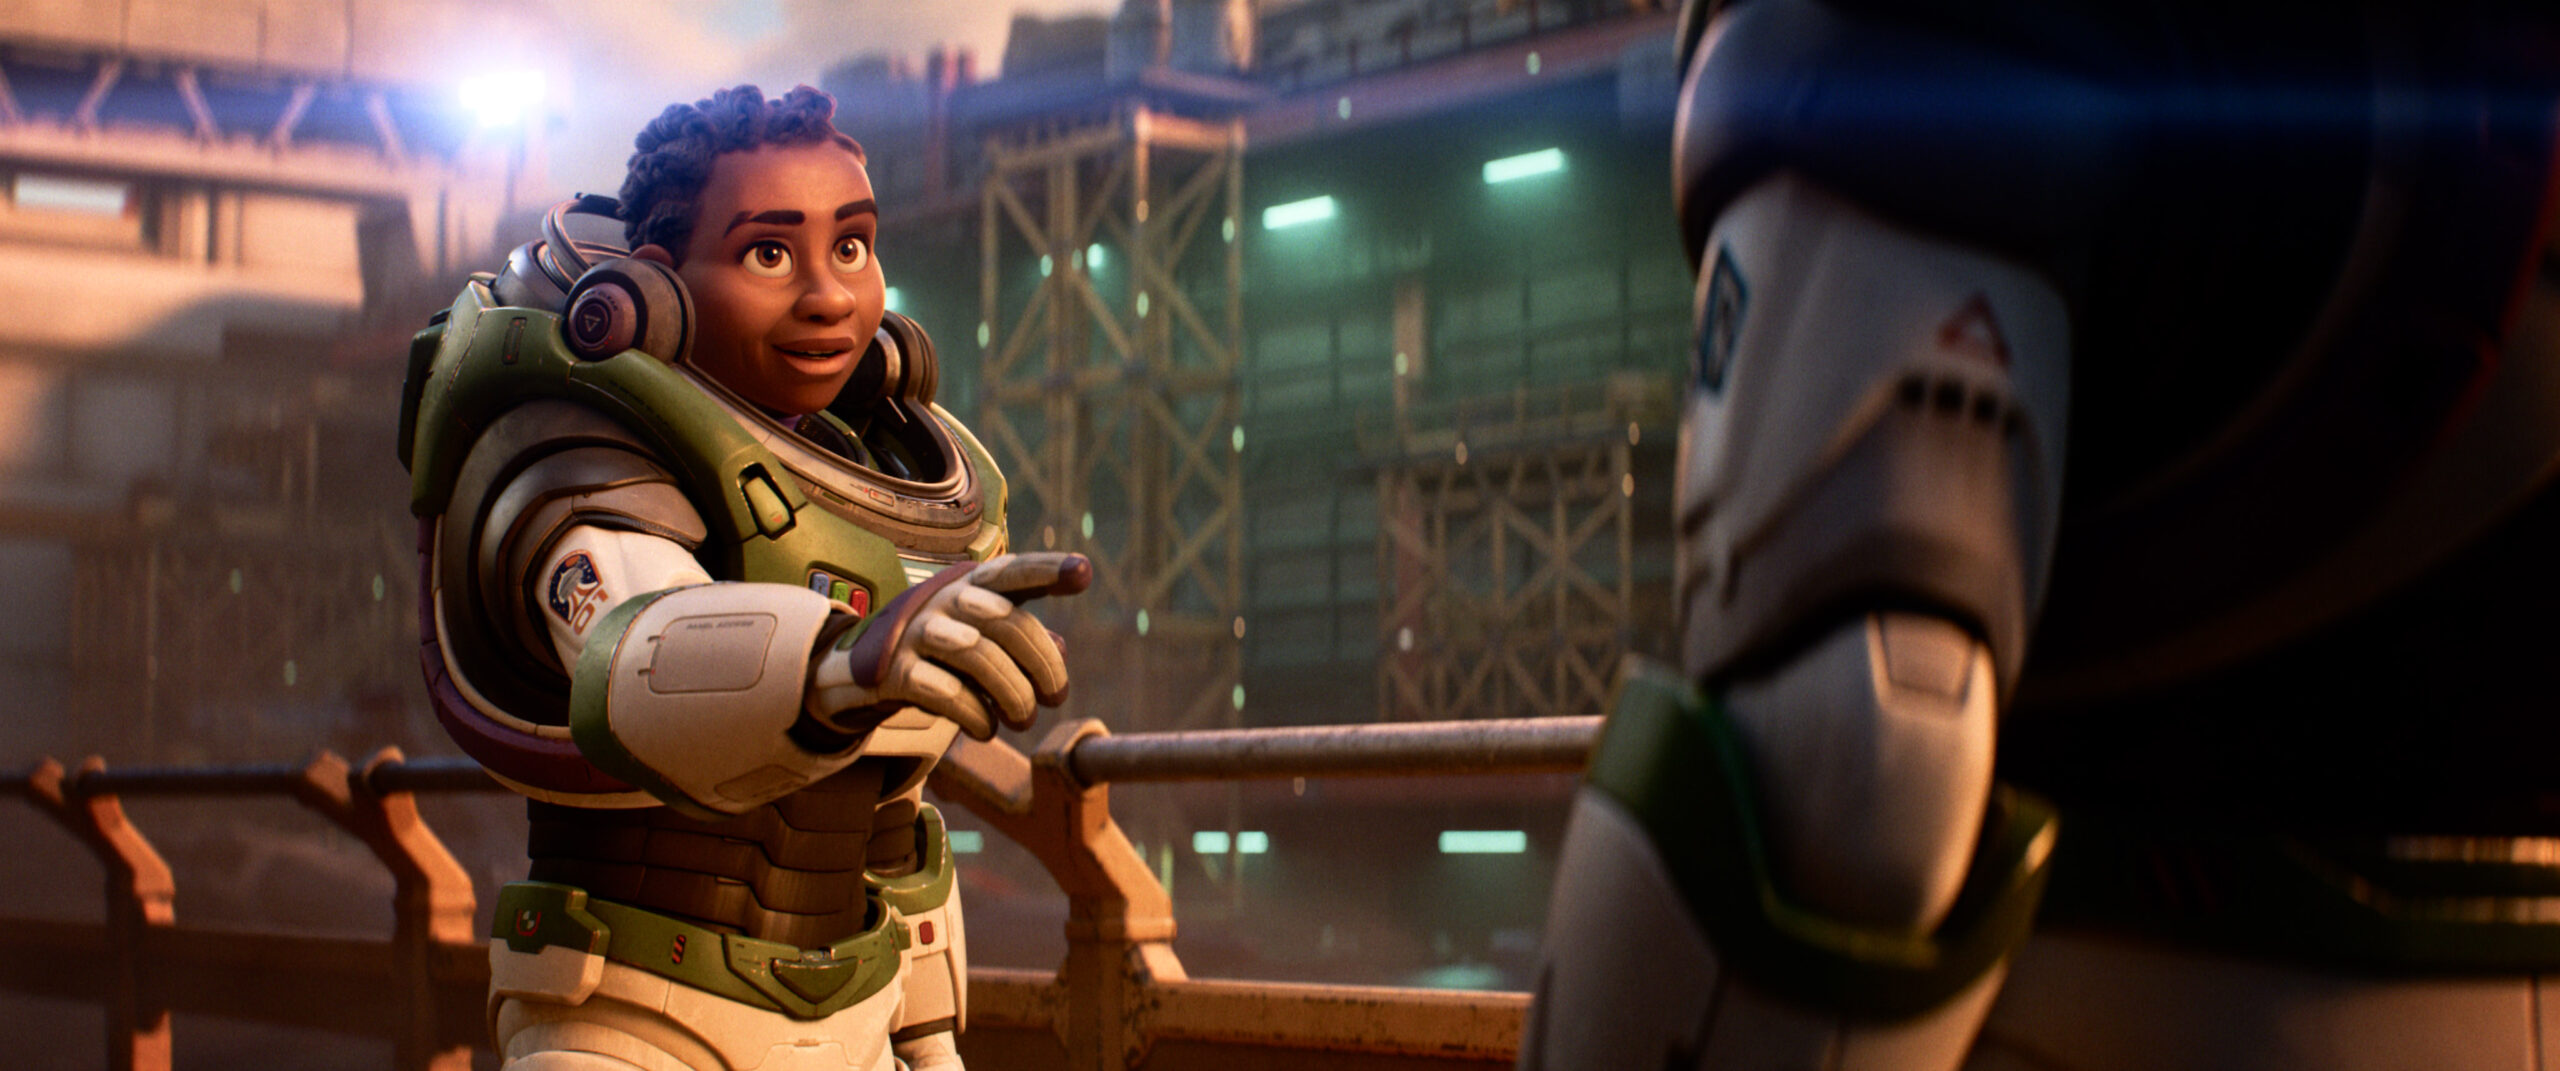 MAKING SPACE – Disney and Pixar’s “Lightyear” introduces Alisha Hawthorne (voice of Uzo Aduba), Buzz’s long-time commander, fellow Space Ranger and trusted friend. Directed by Angus MacLane (co-director “Finding Dory”) and produced by Galyn Susman (“Toy Story That Time Forgot”), the sci-fi action-adventure opens in U.S. theaters on June 17, 2022. © 2022 Disney/Pixar. All Rights Reserved.